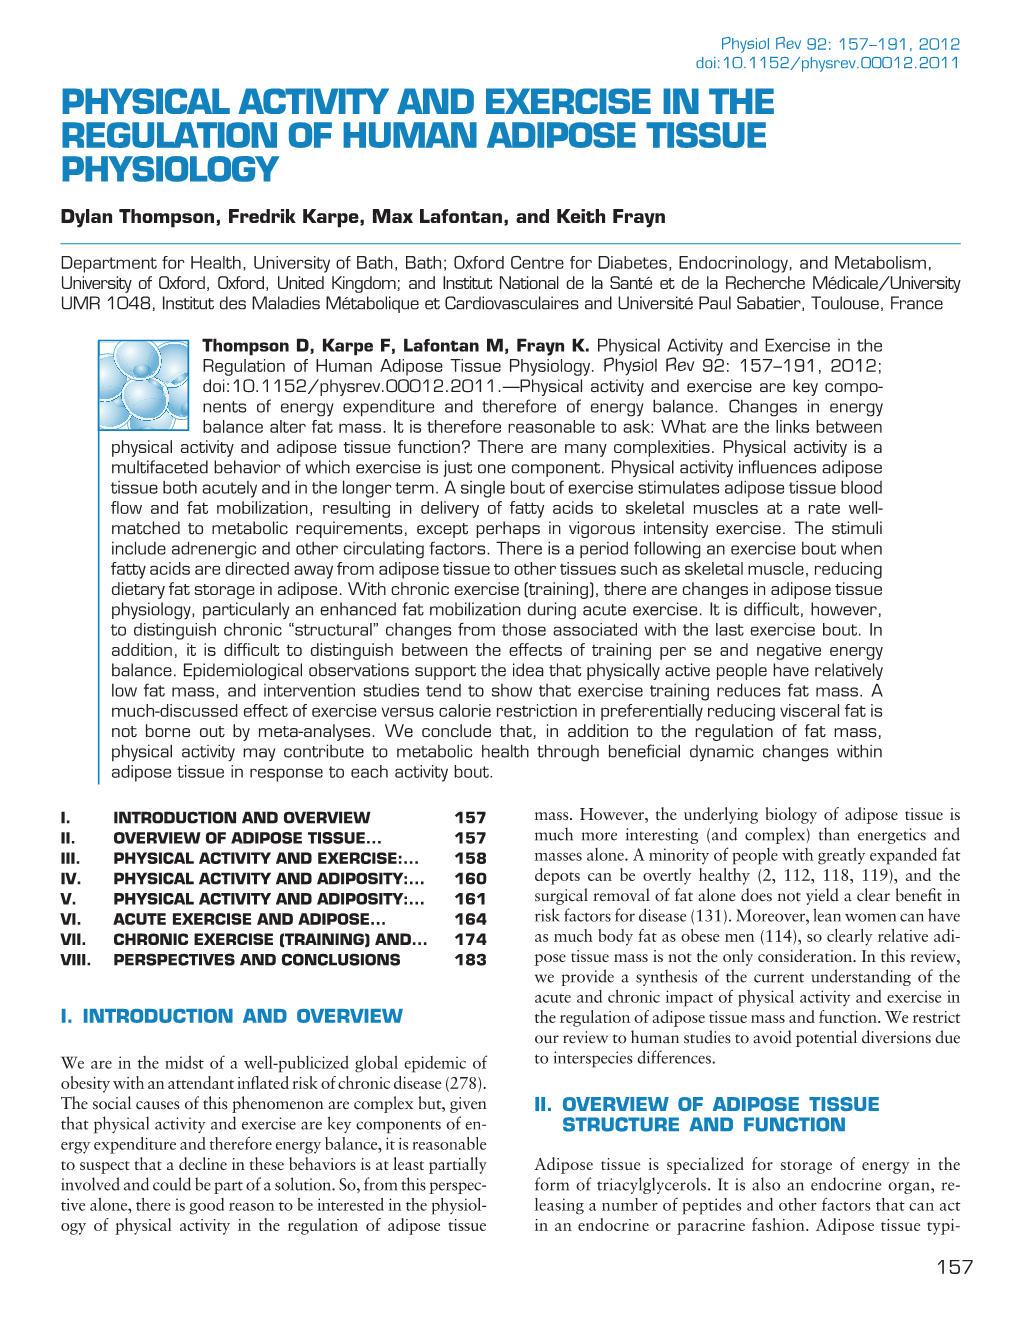 Physical Activity and Exercise in the Regulation of Human Adipose Tissue Physiology